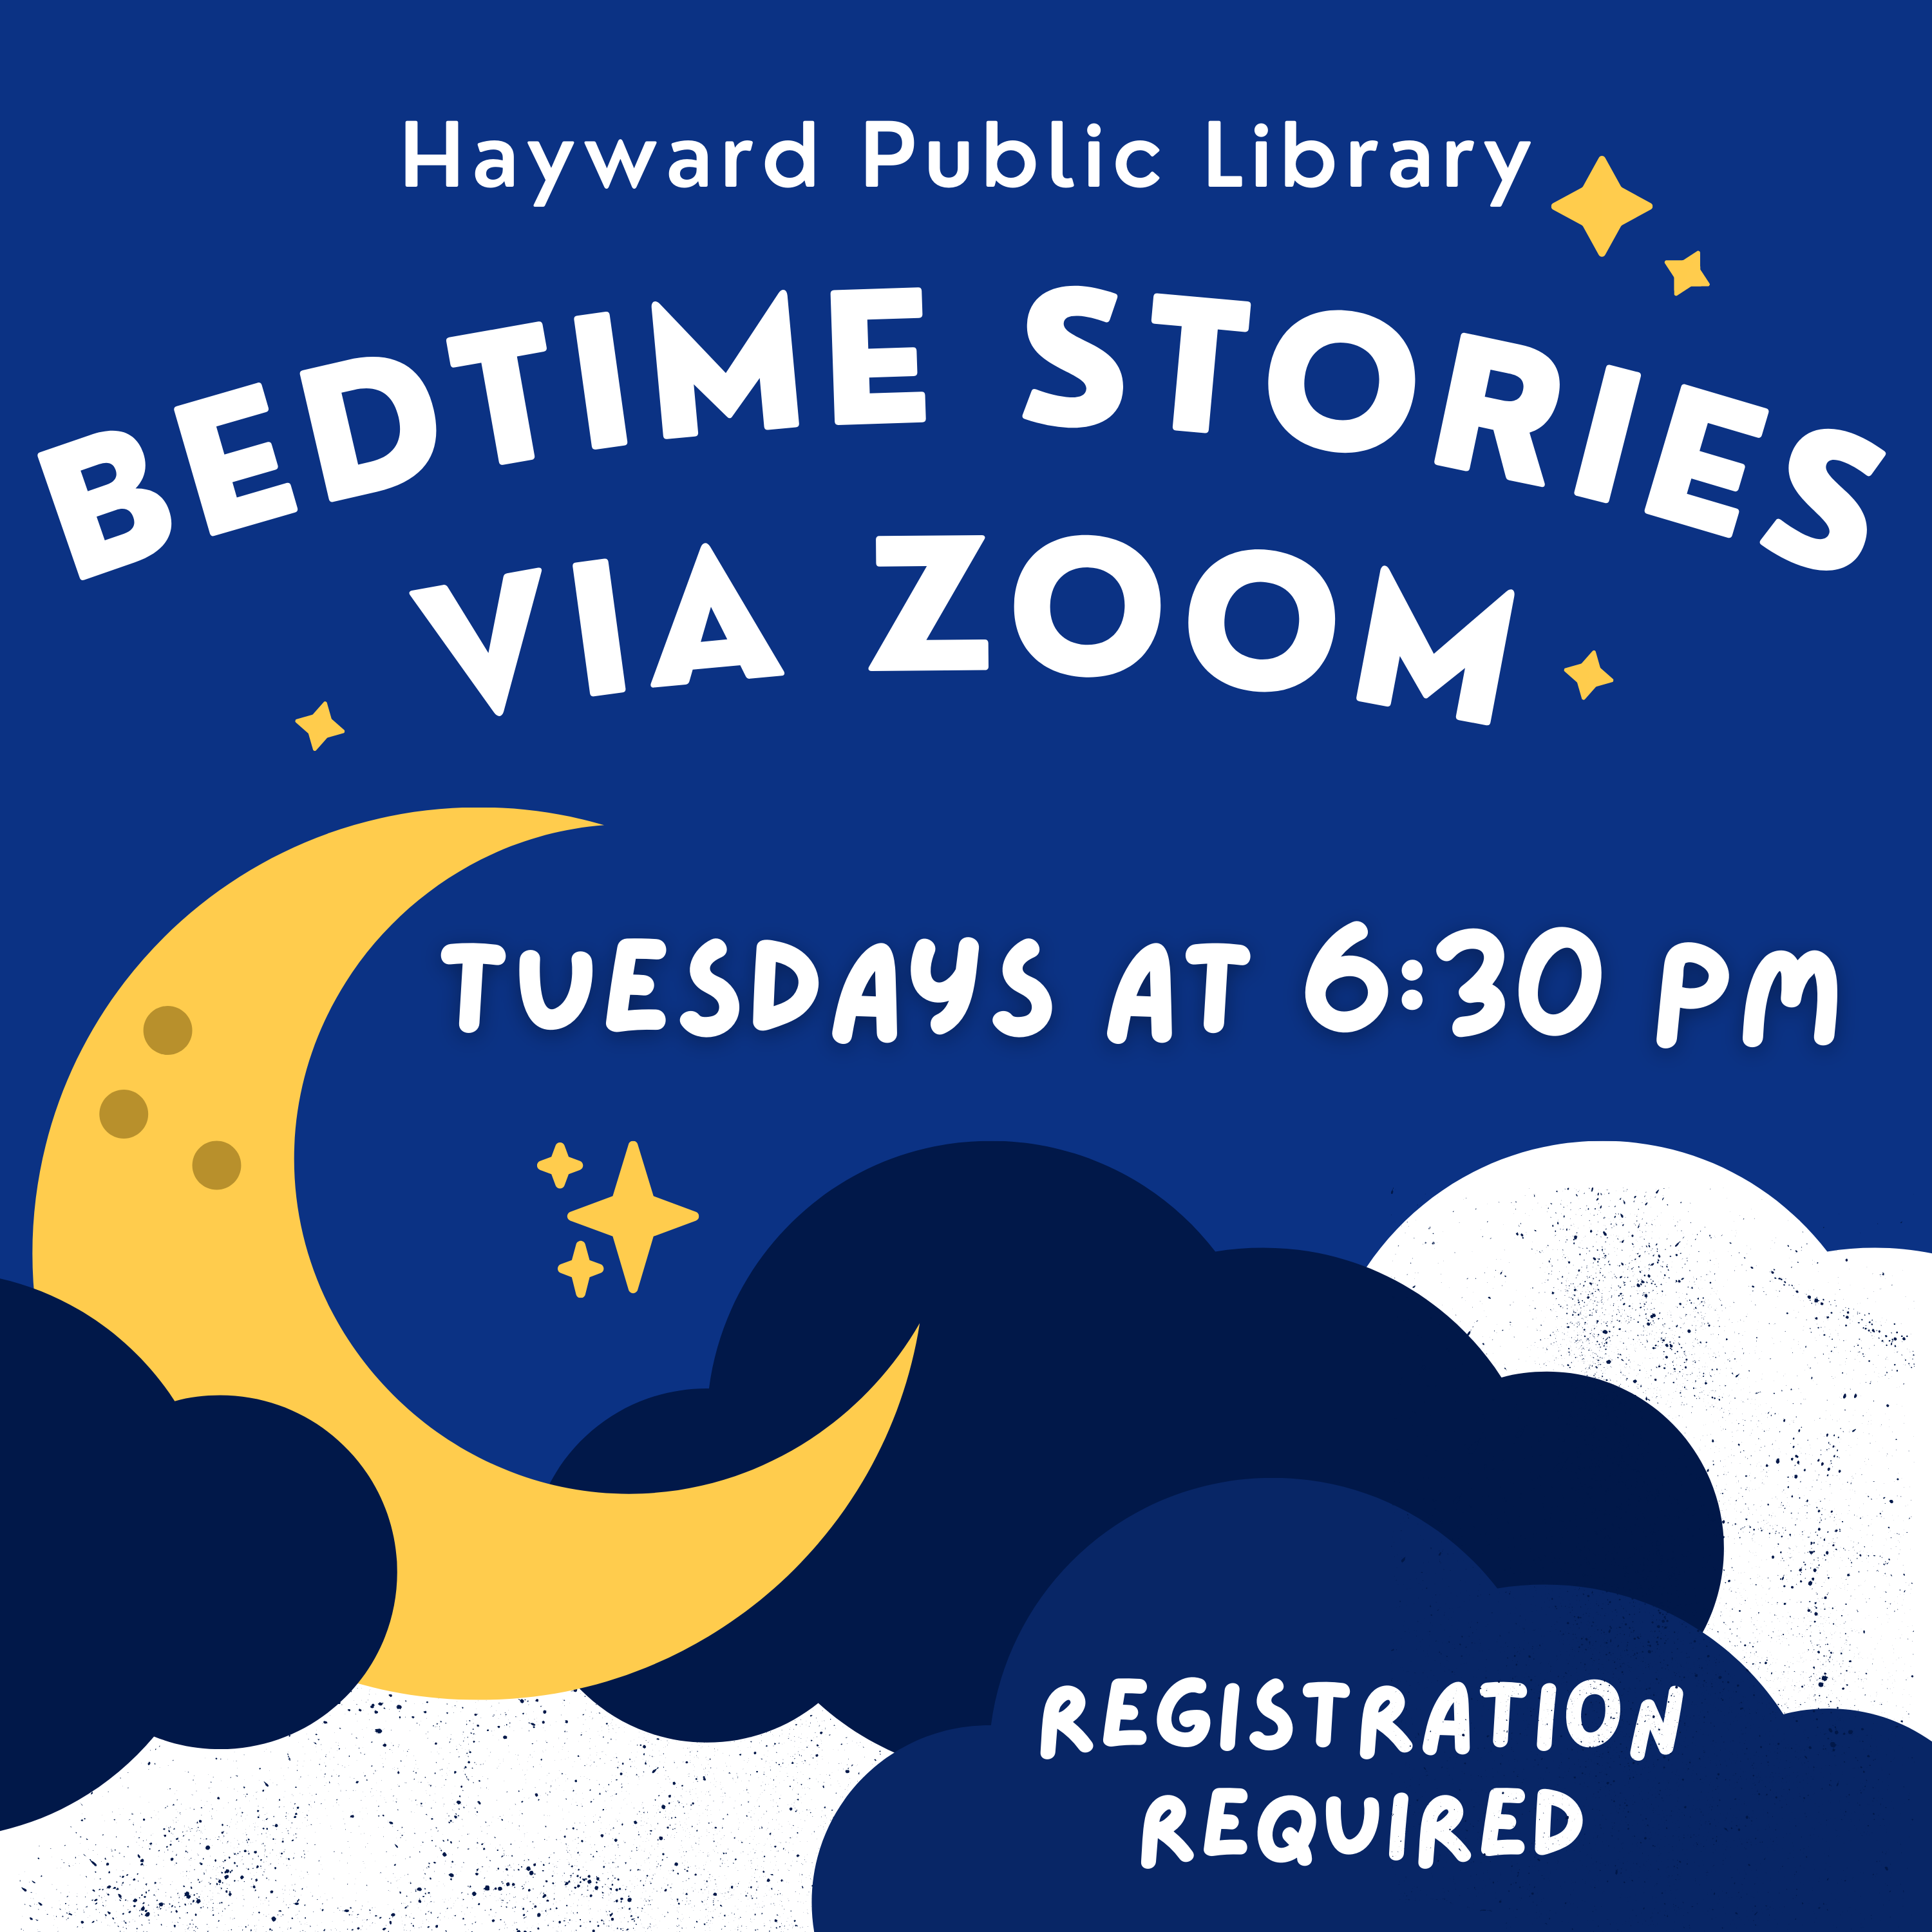 Image Description, blue flyer with yellow moon and stars, blue and white clouds, text says Hayward Public Library, Bedtime Stories via Zoom, Tuesdays at 6:30 pm, registration required